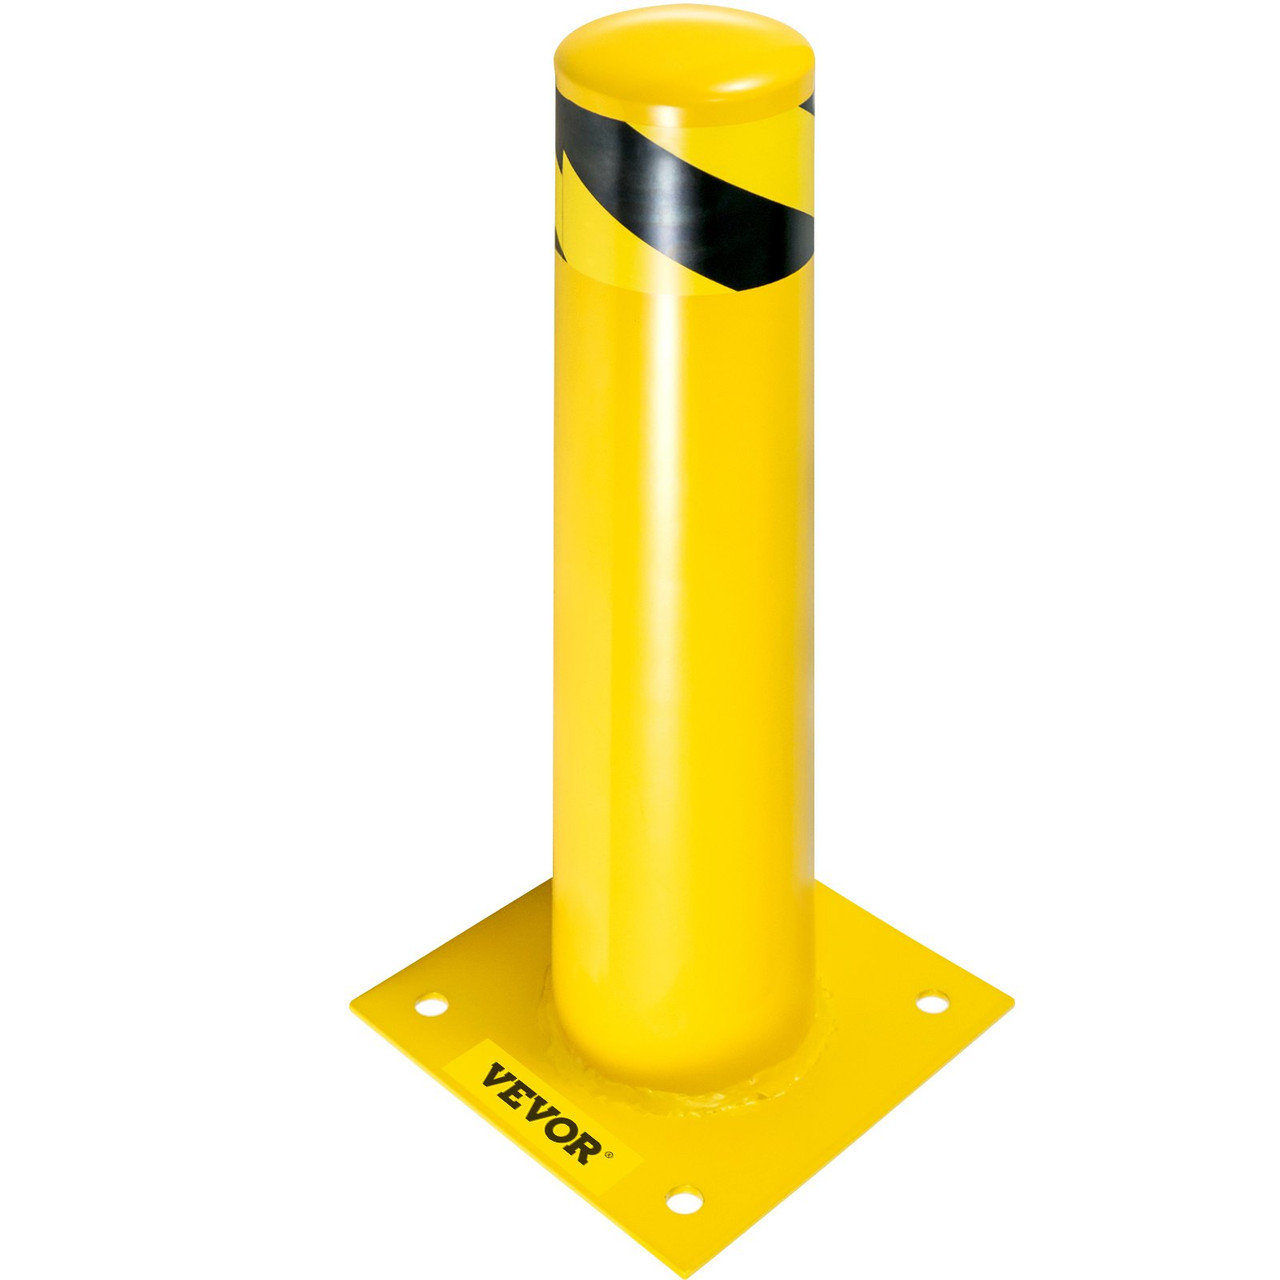 Safety Bollard 24-4.5 Safety Barrier Bollard 4-1/2" OD 24" Height Yellow Powder Coat Pipe Steel Safety Barrier with 4 Free Anchor Bolts for Traffic-Sensitive Area